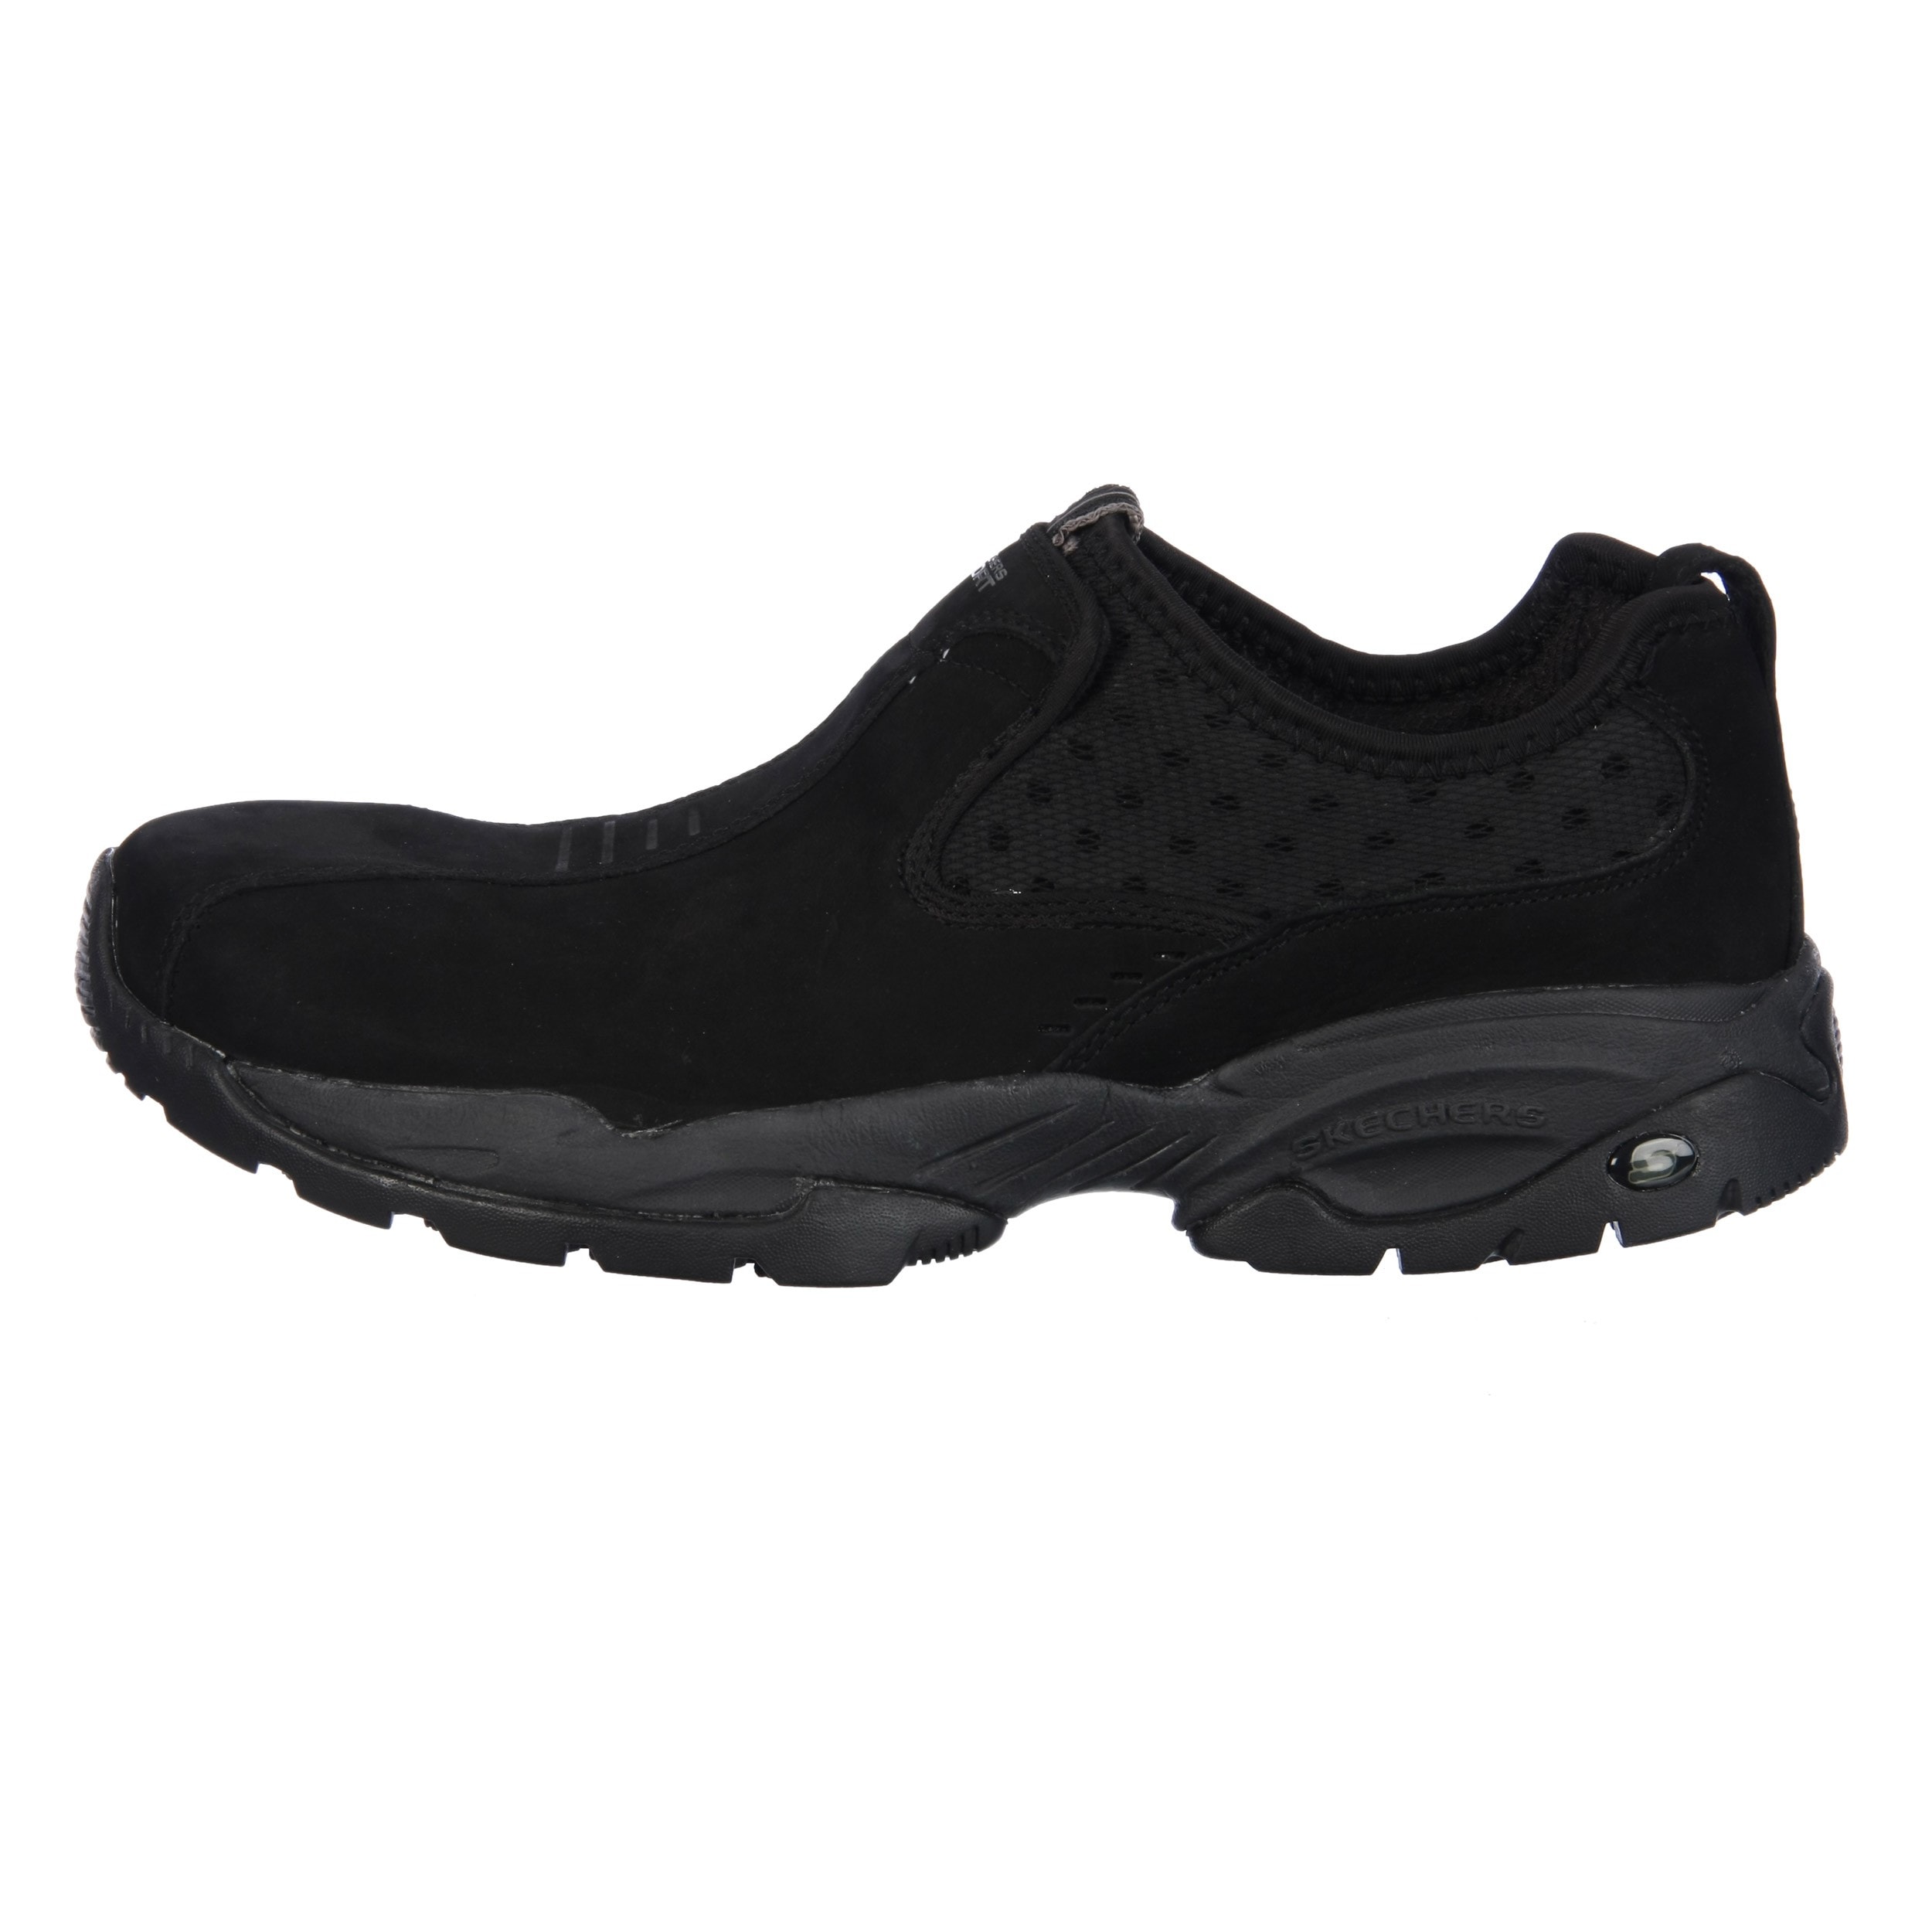 skechers mens trainers sports direct